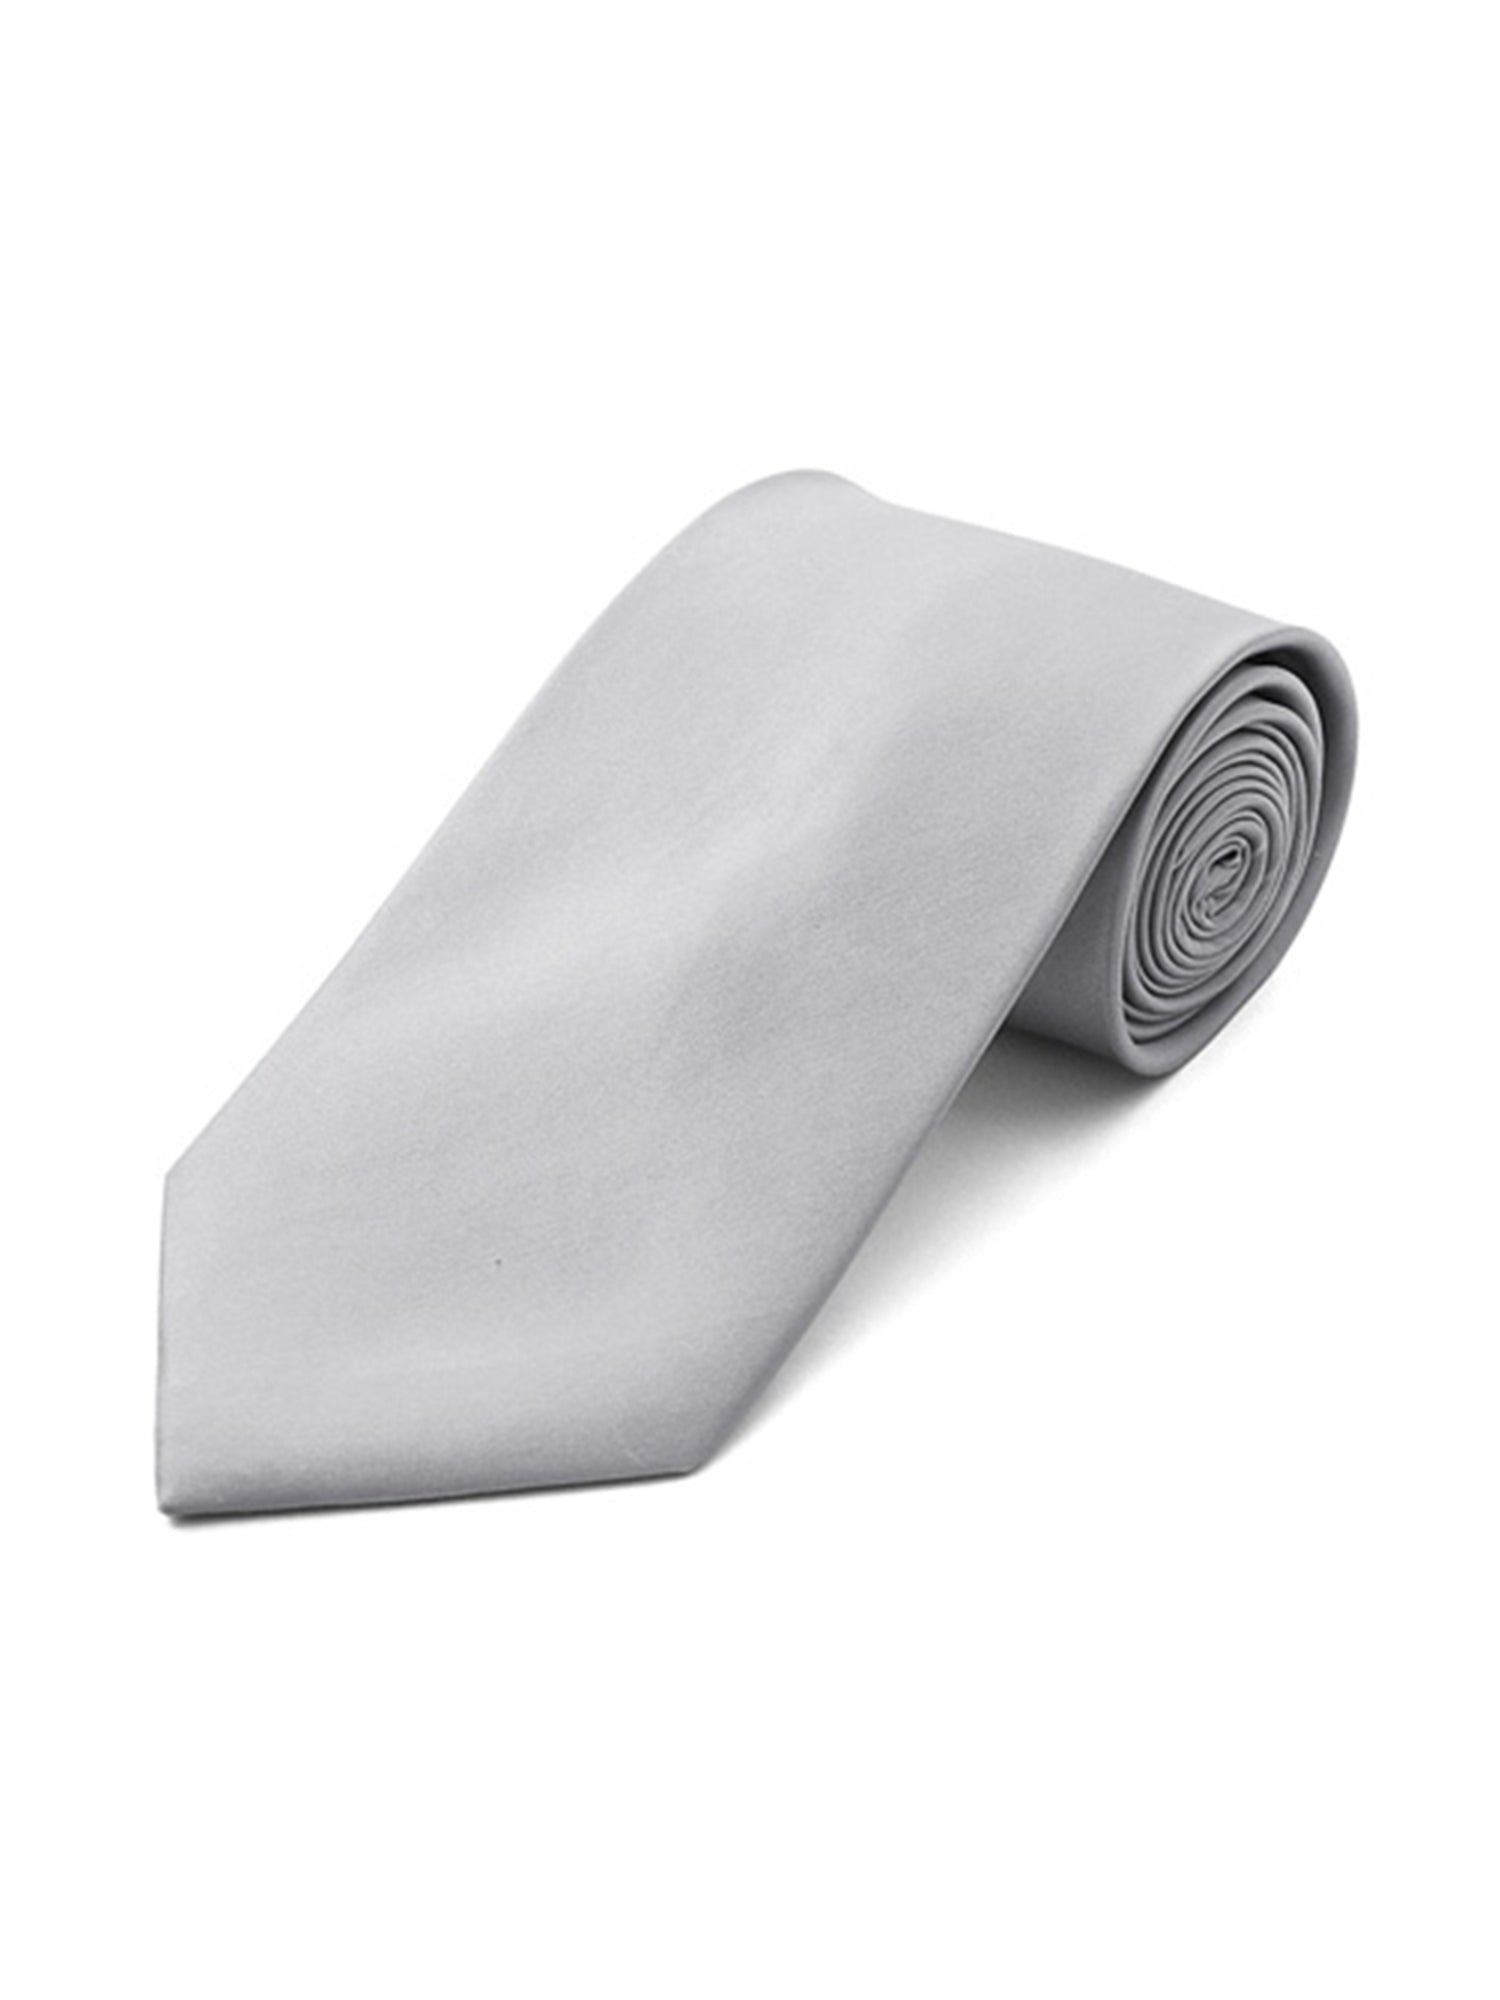 Men's Solid Color 2.75 Inch Wide And 57 Inch Long Slim Neckties Neck Tie TheDapperTie Silver  